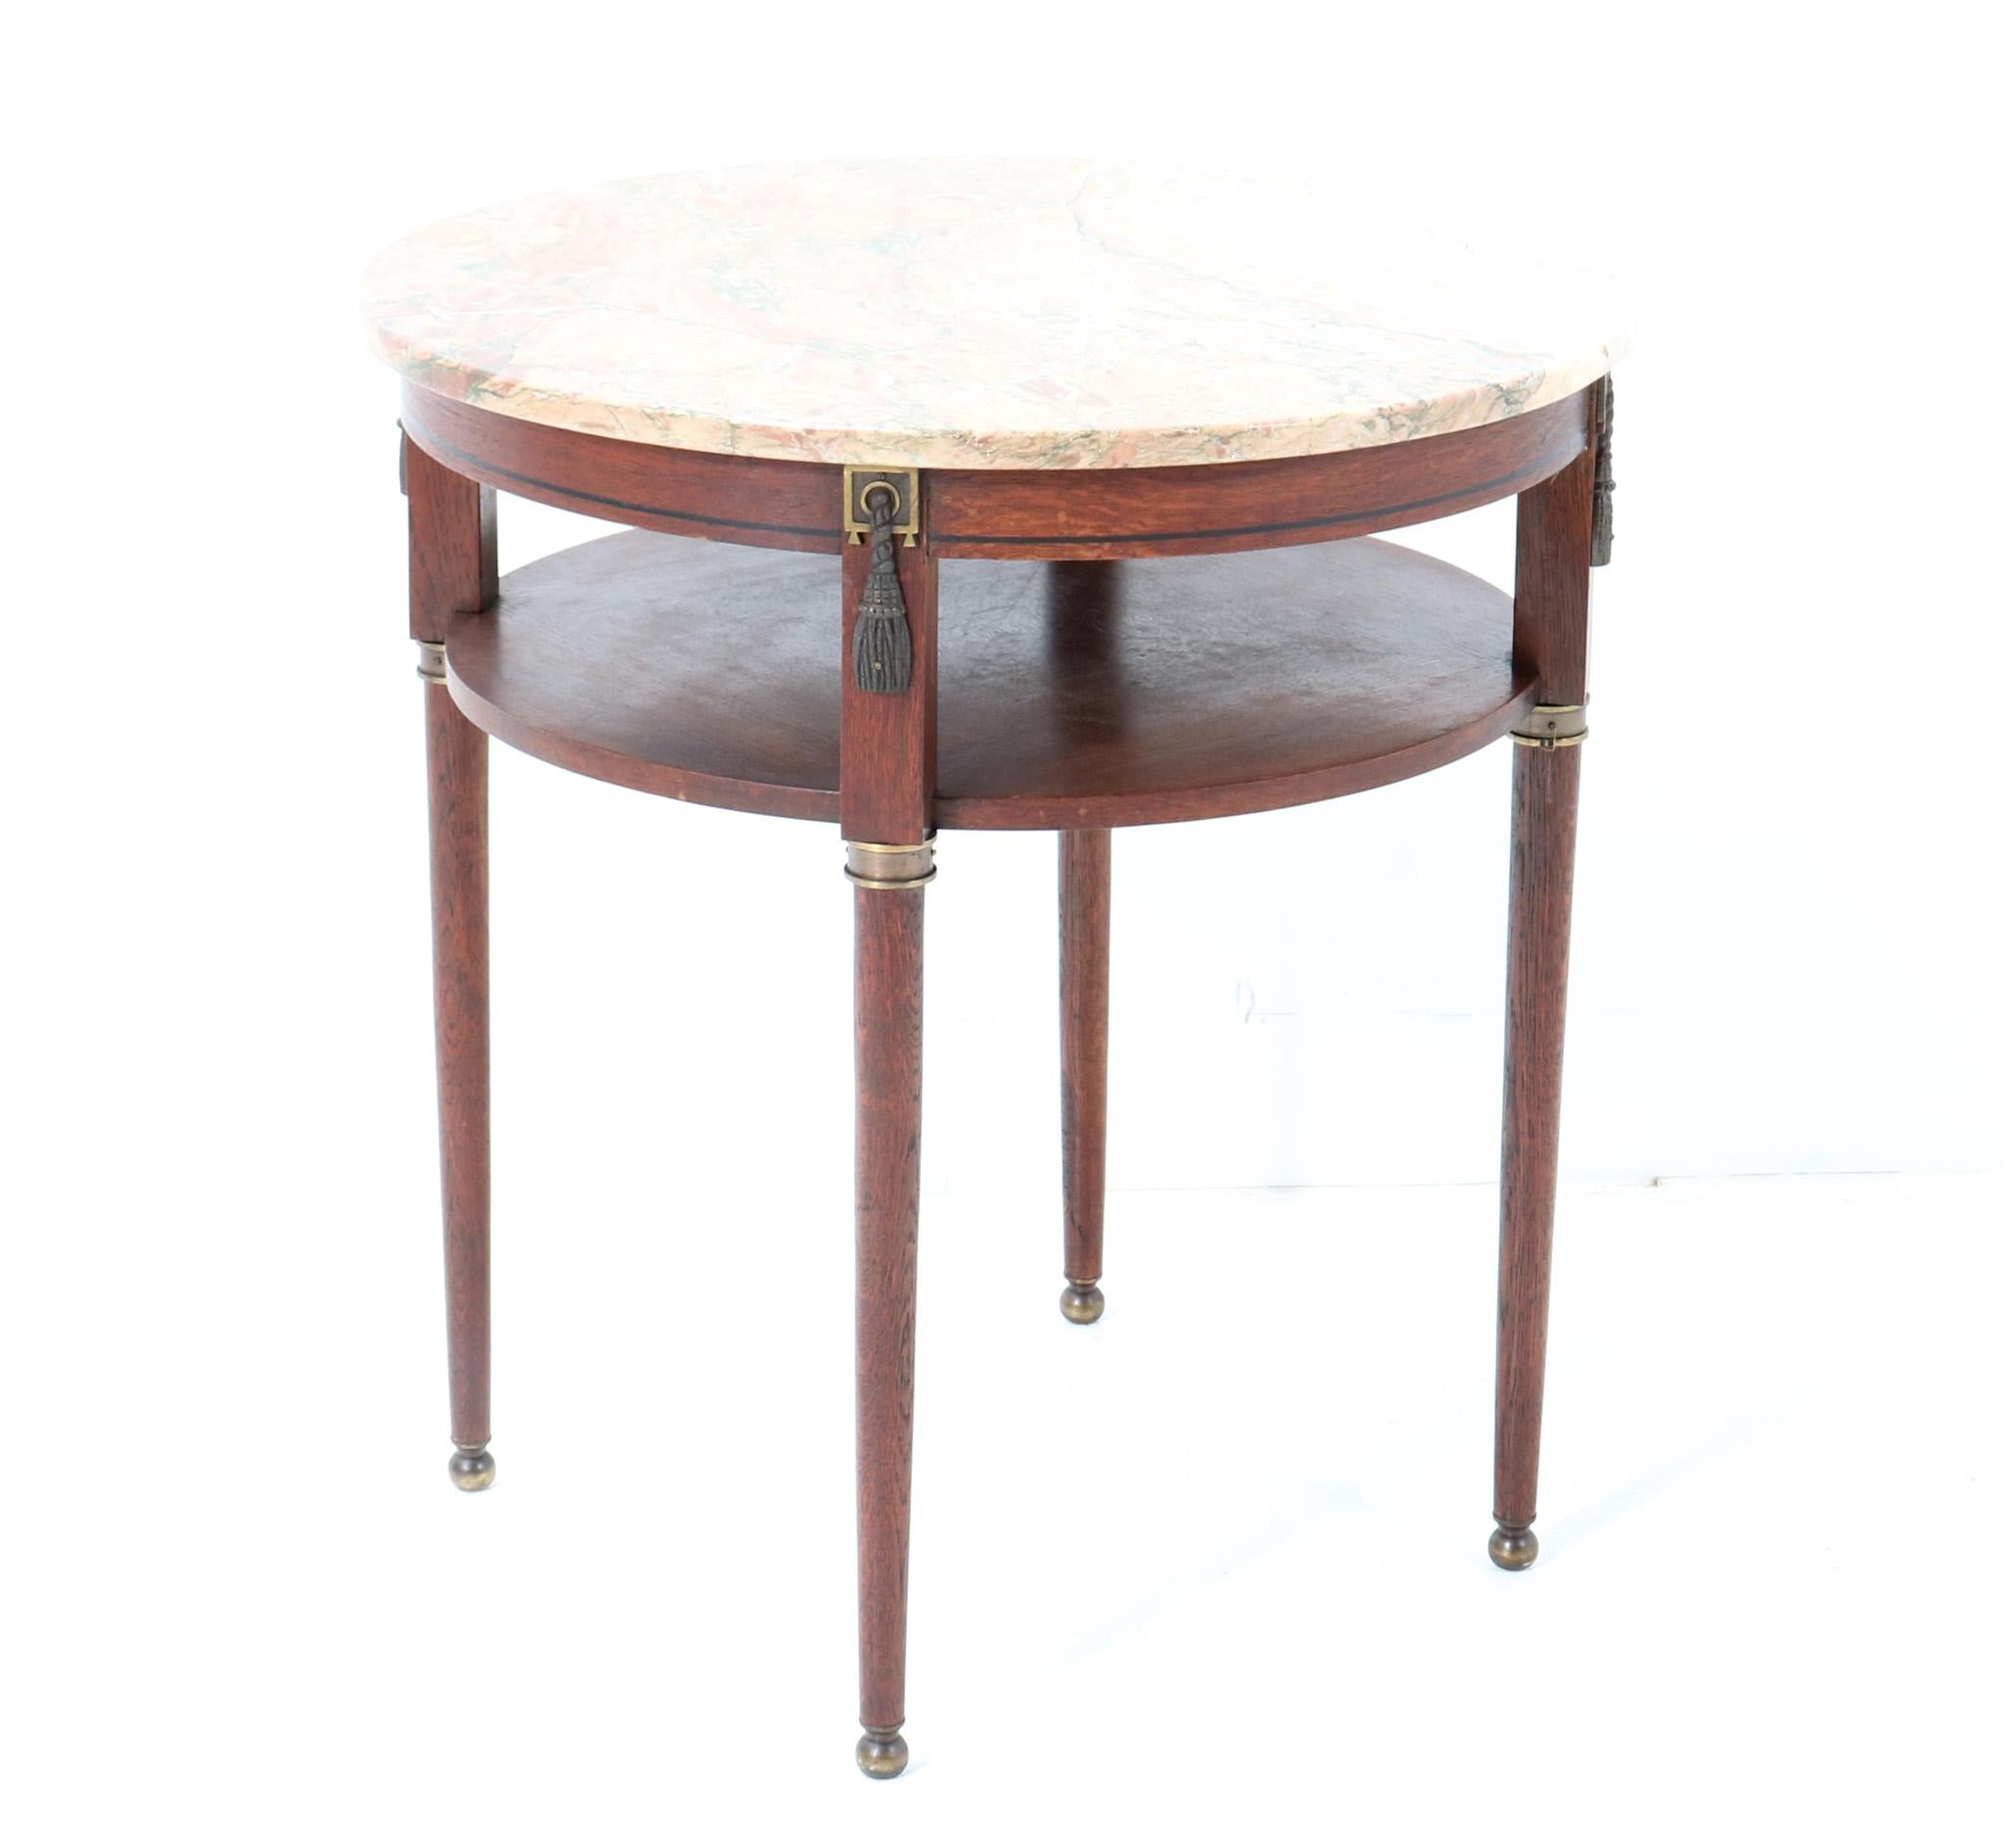 Amazing and rare Art Deco side table or center table.
Striking French design from the 1930s.
Solid oak and original oak veneer base with original patinated brass elements.
Original multi-colored marble top.
This wonderful Art Deco side table or